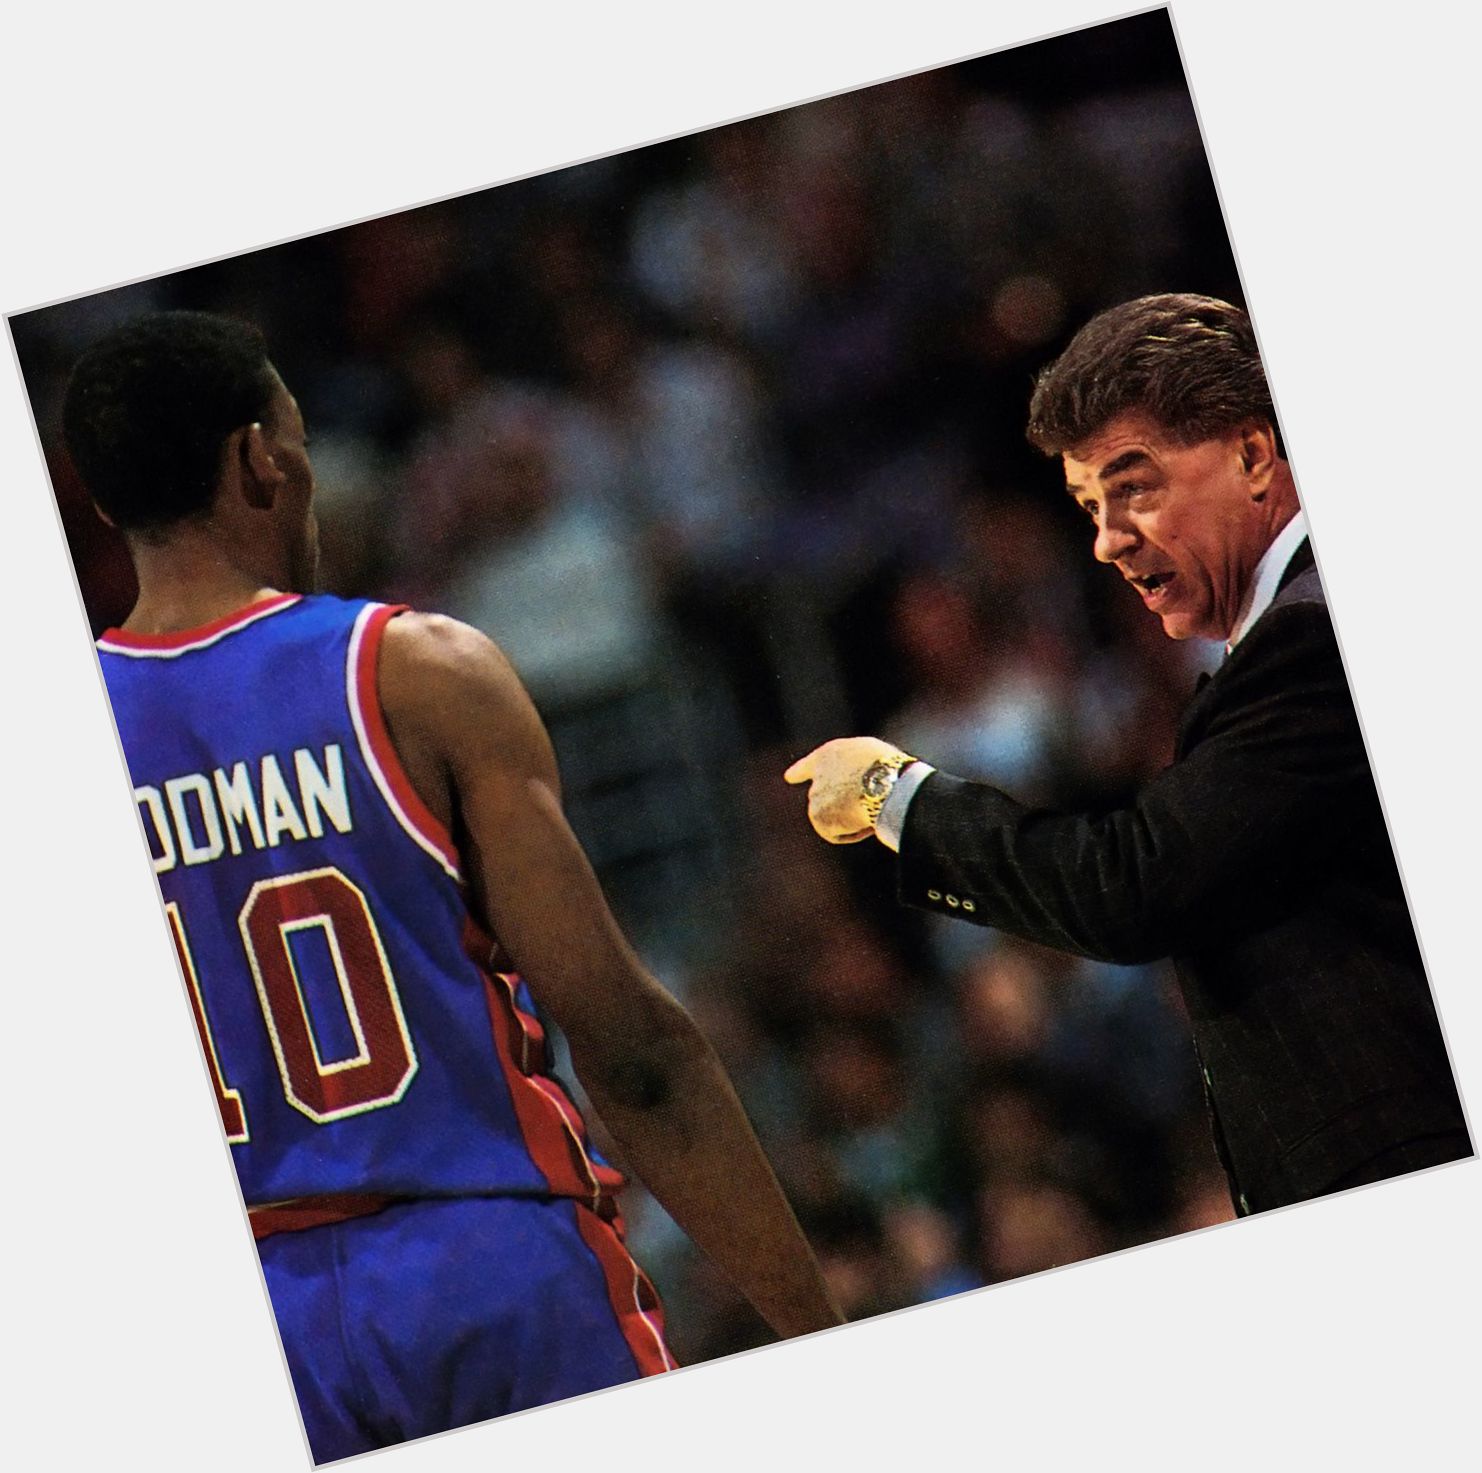 Chuck Daly marriage 3